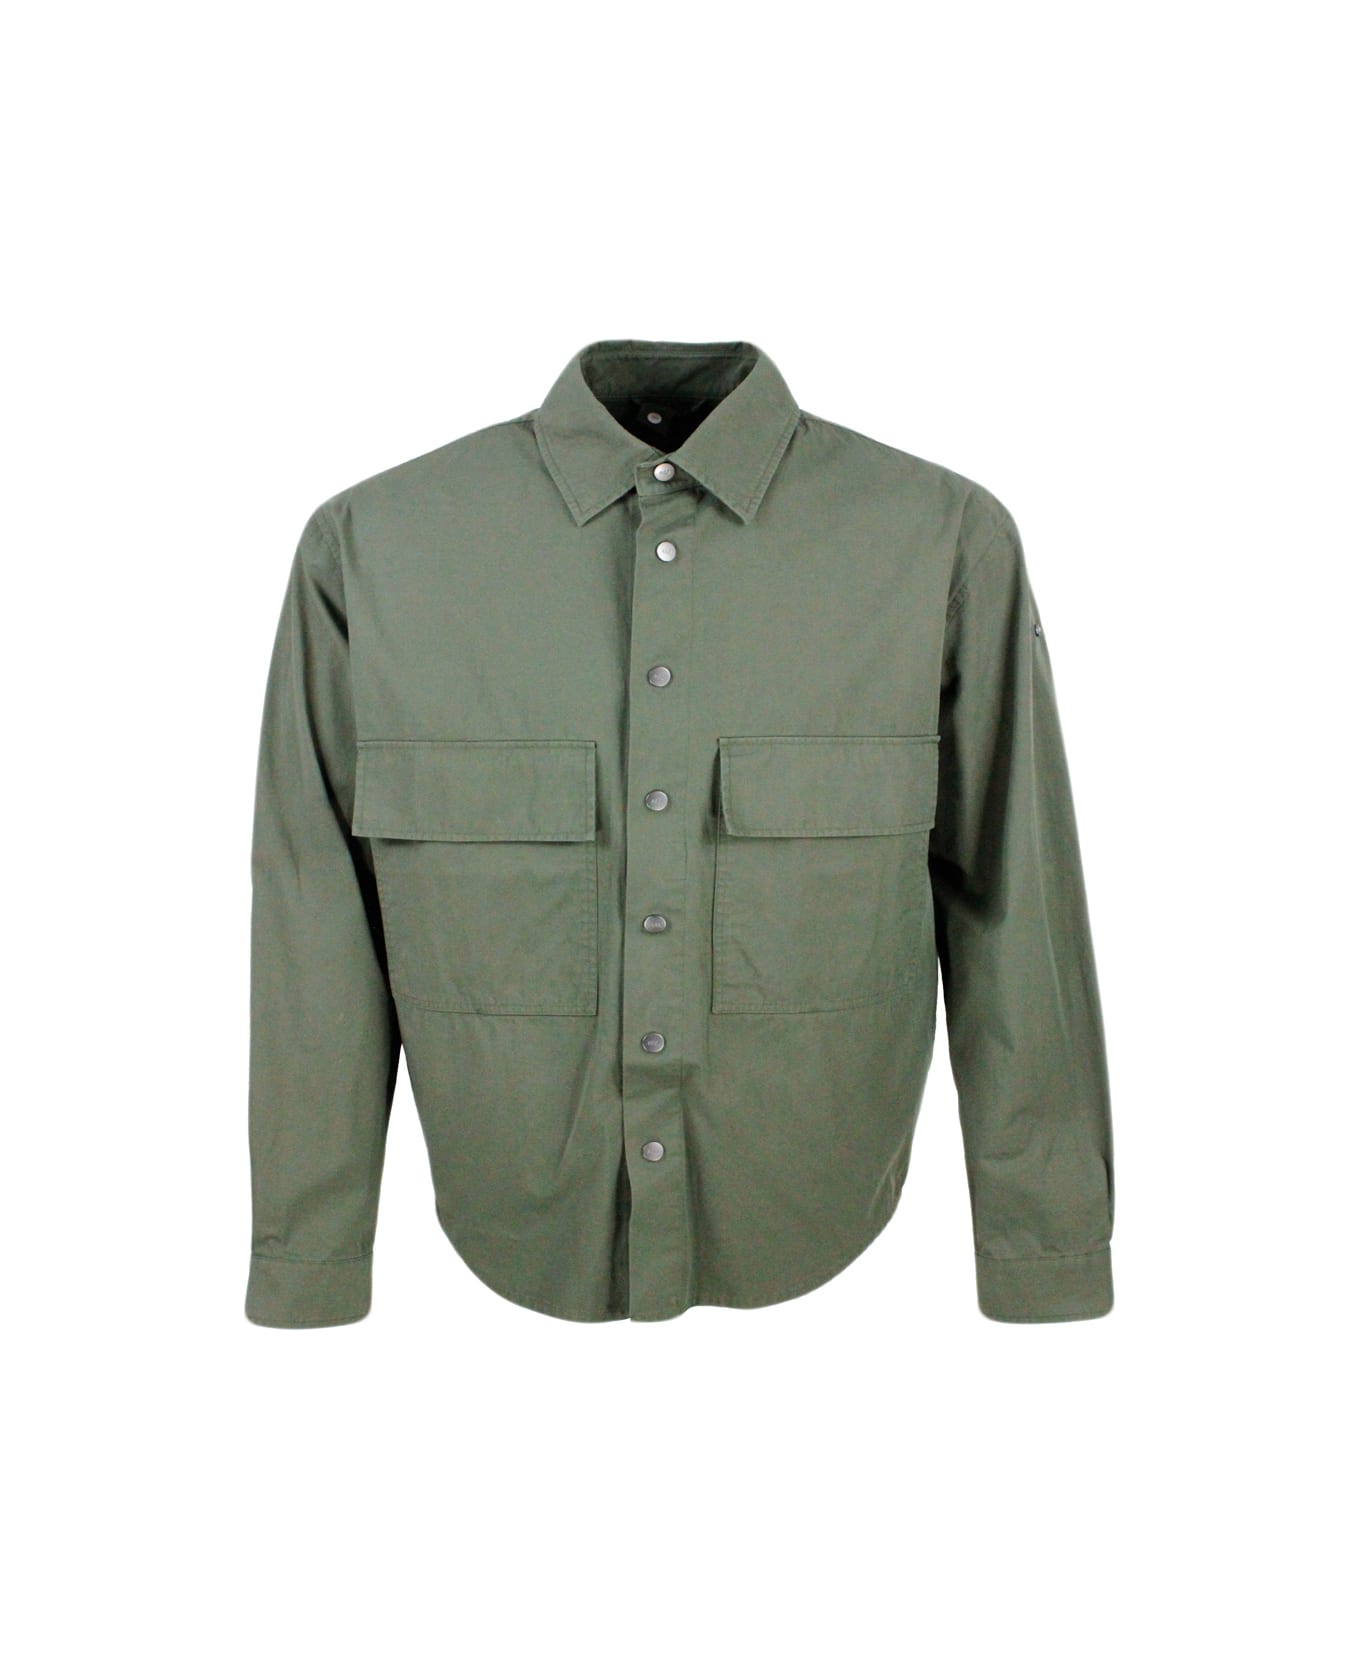 Add Recycled Nylon Shirt Jacket With Detachable Internal Padded Vest. - Military